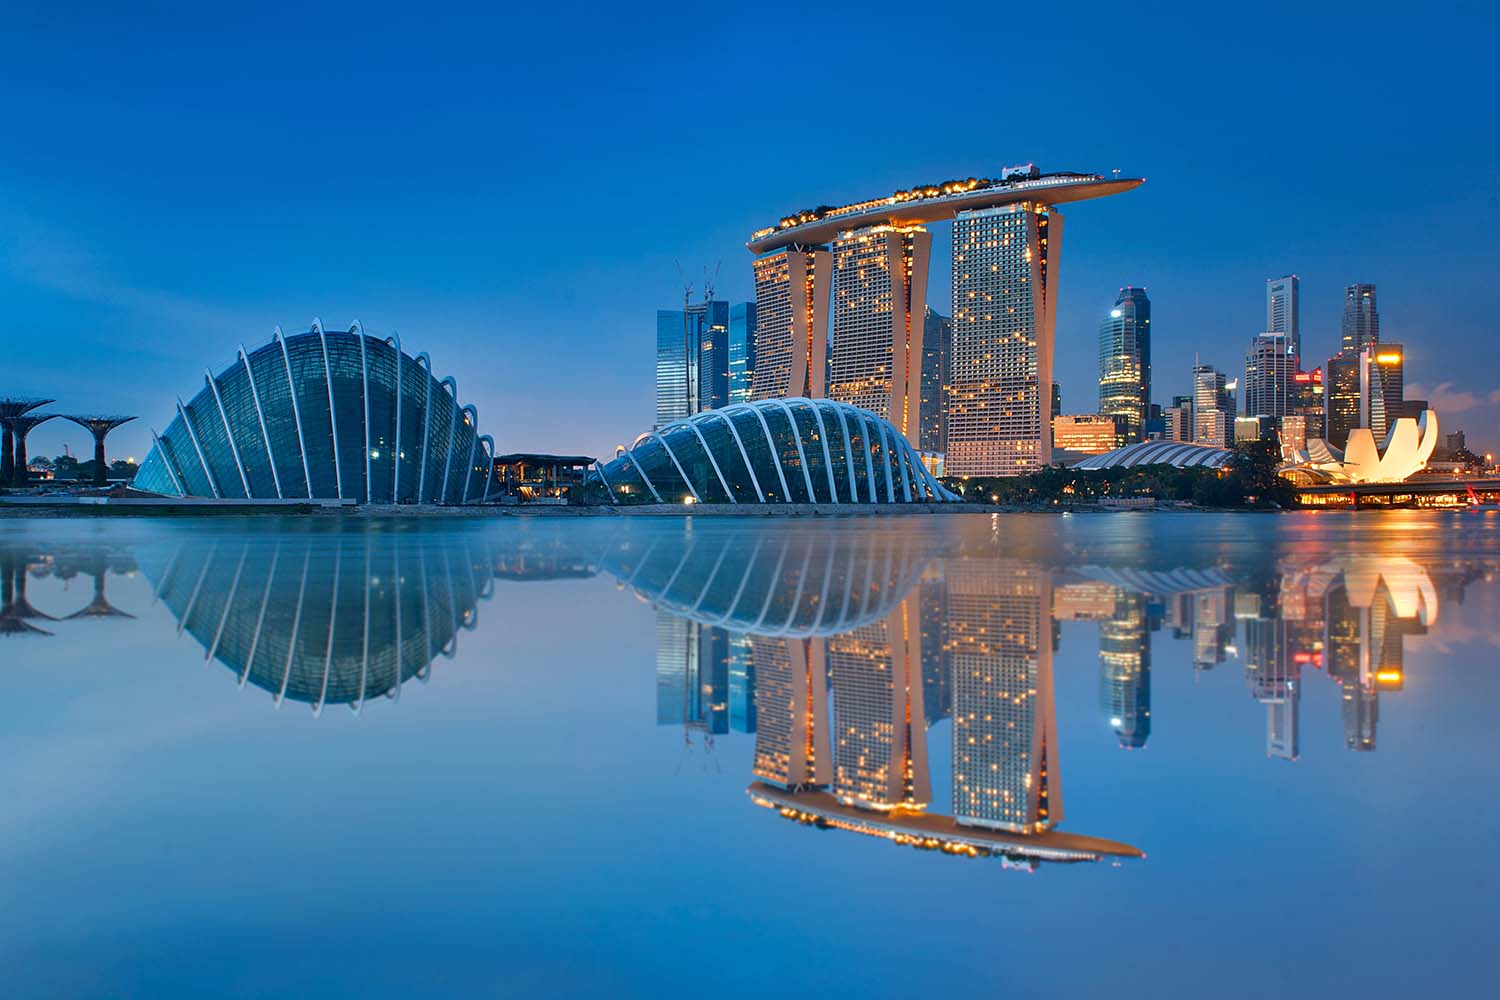 Gardens by the Bay and the skyline in Singapore, one of our favorite winter vacation spots